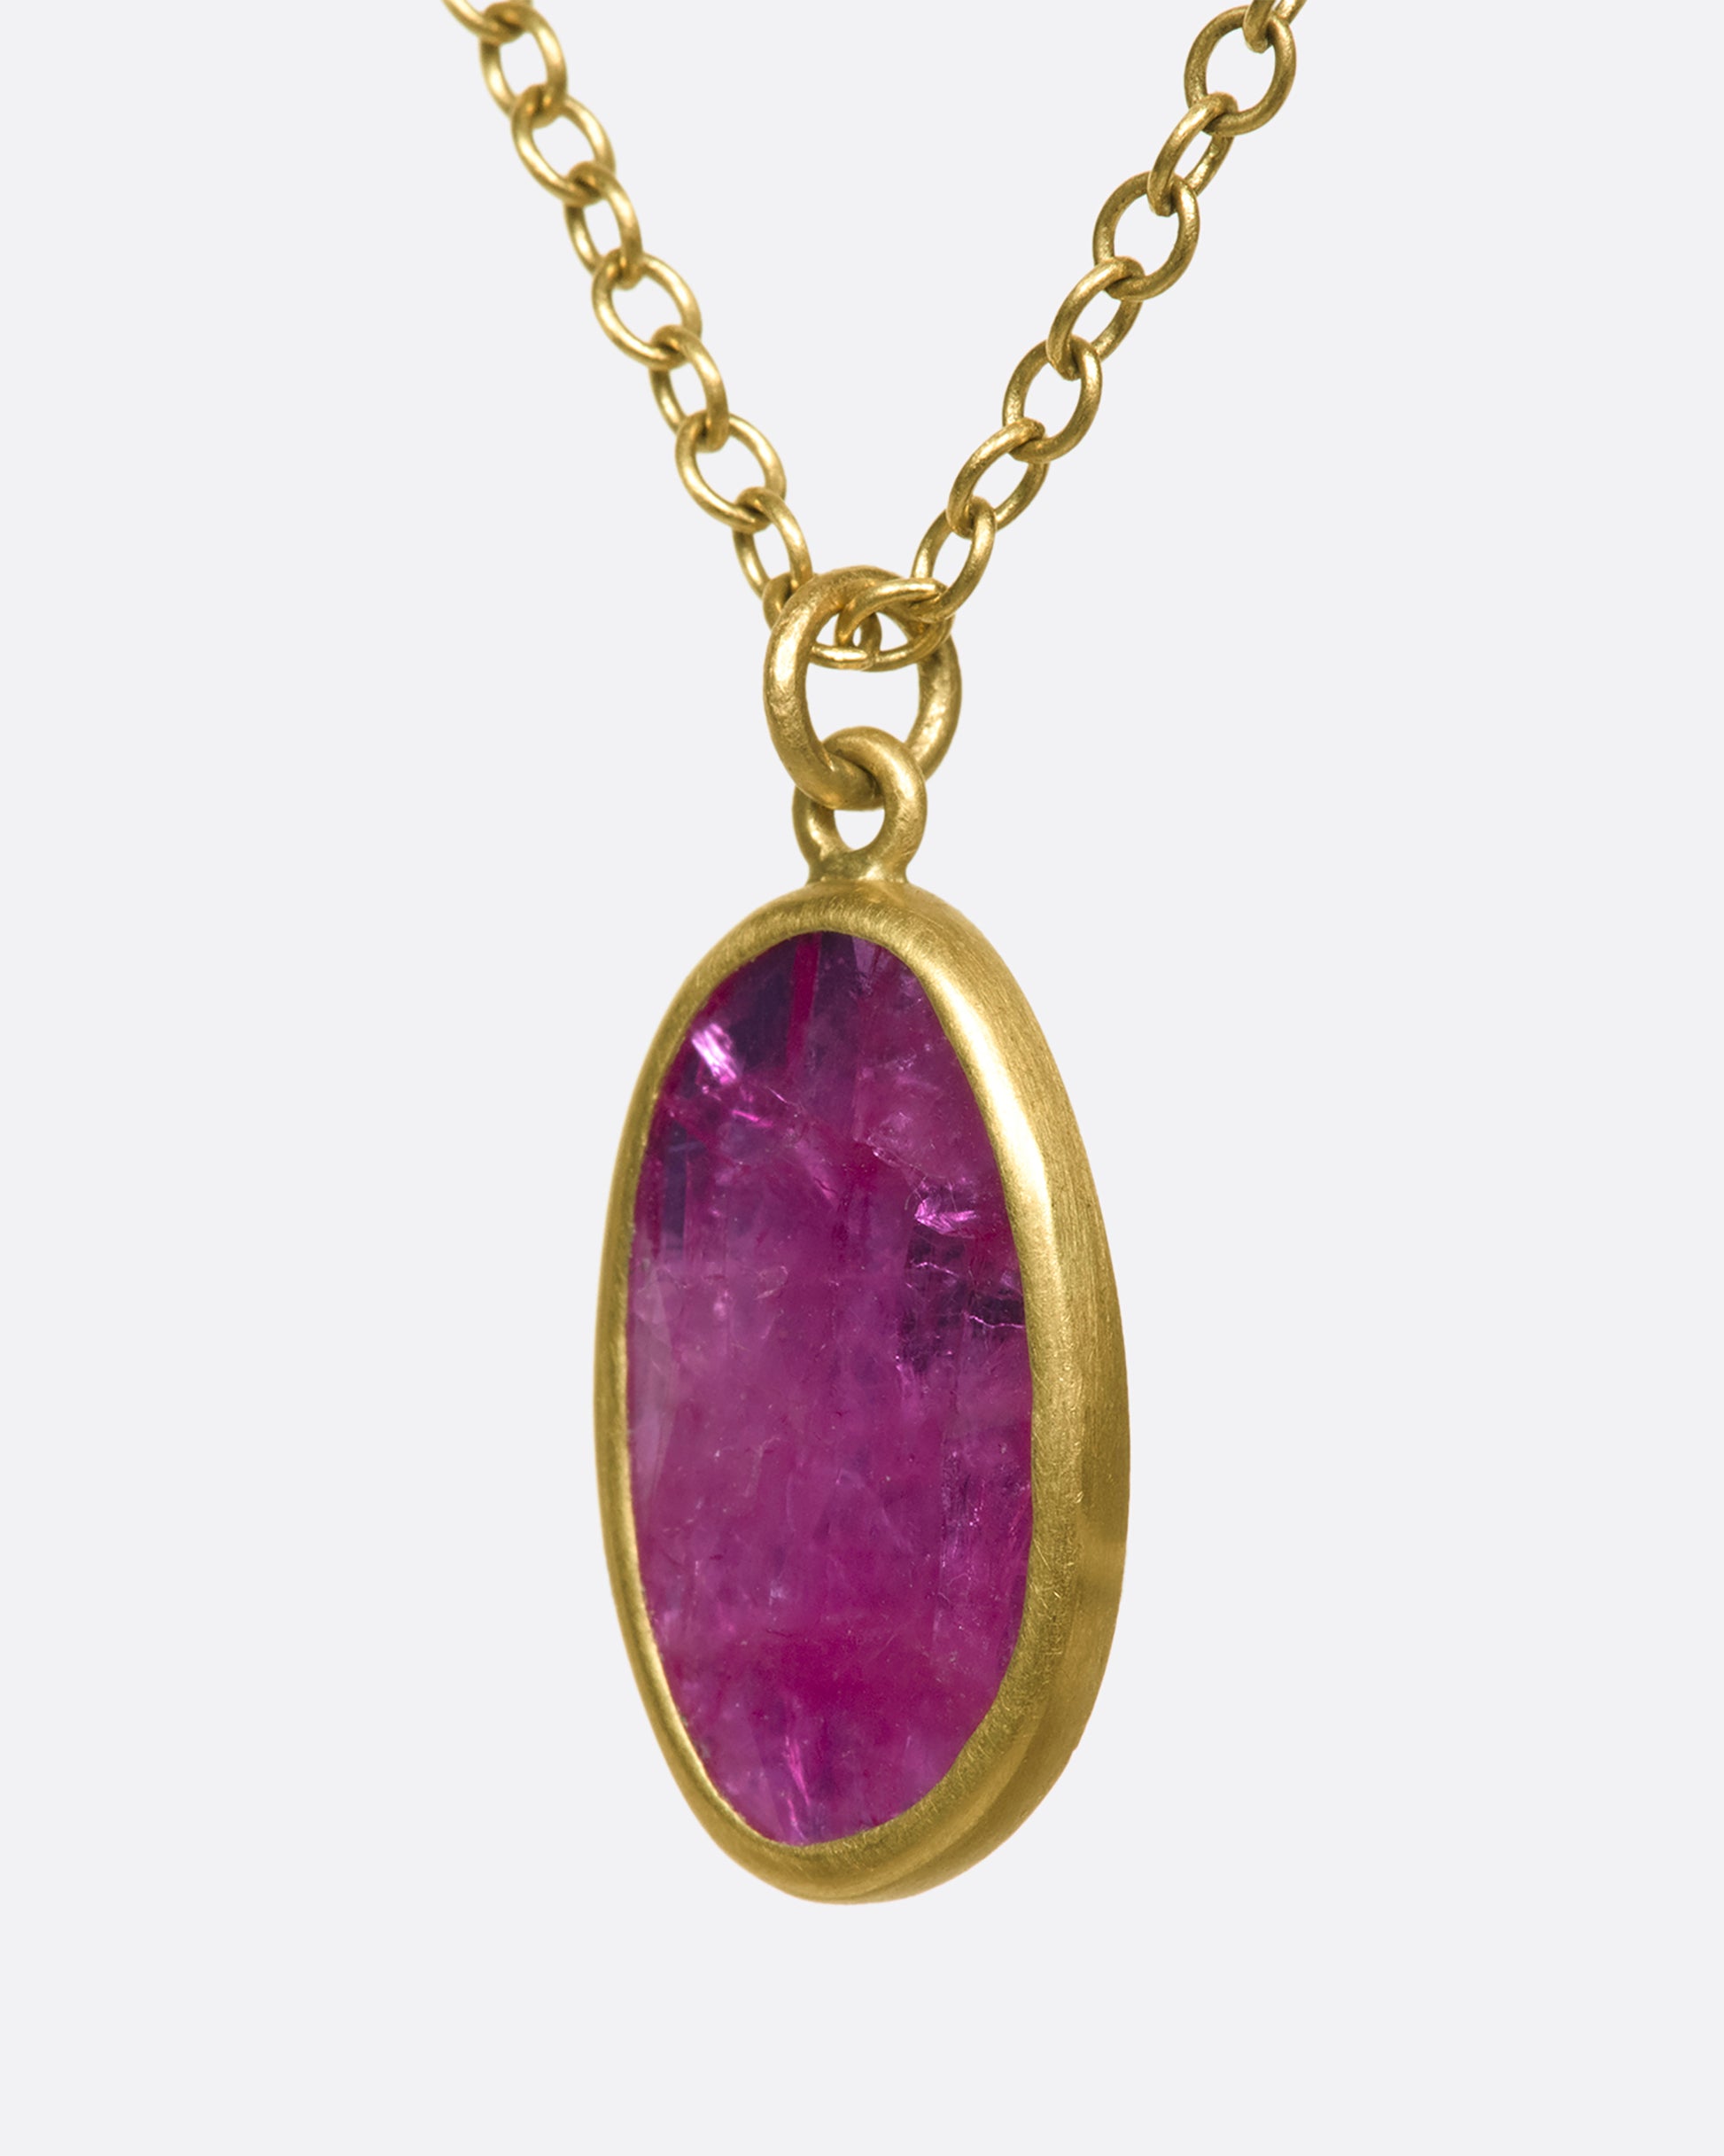 An 18k gold chain with an oval ruby pendant. Rubies are revered for their strong connection to solar energy—symbols of vitality, creativity, and confidence.